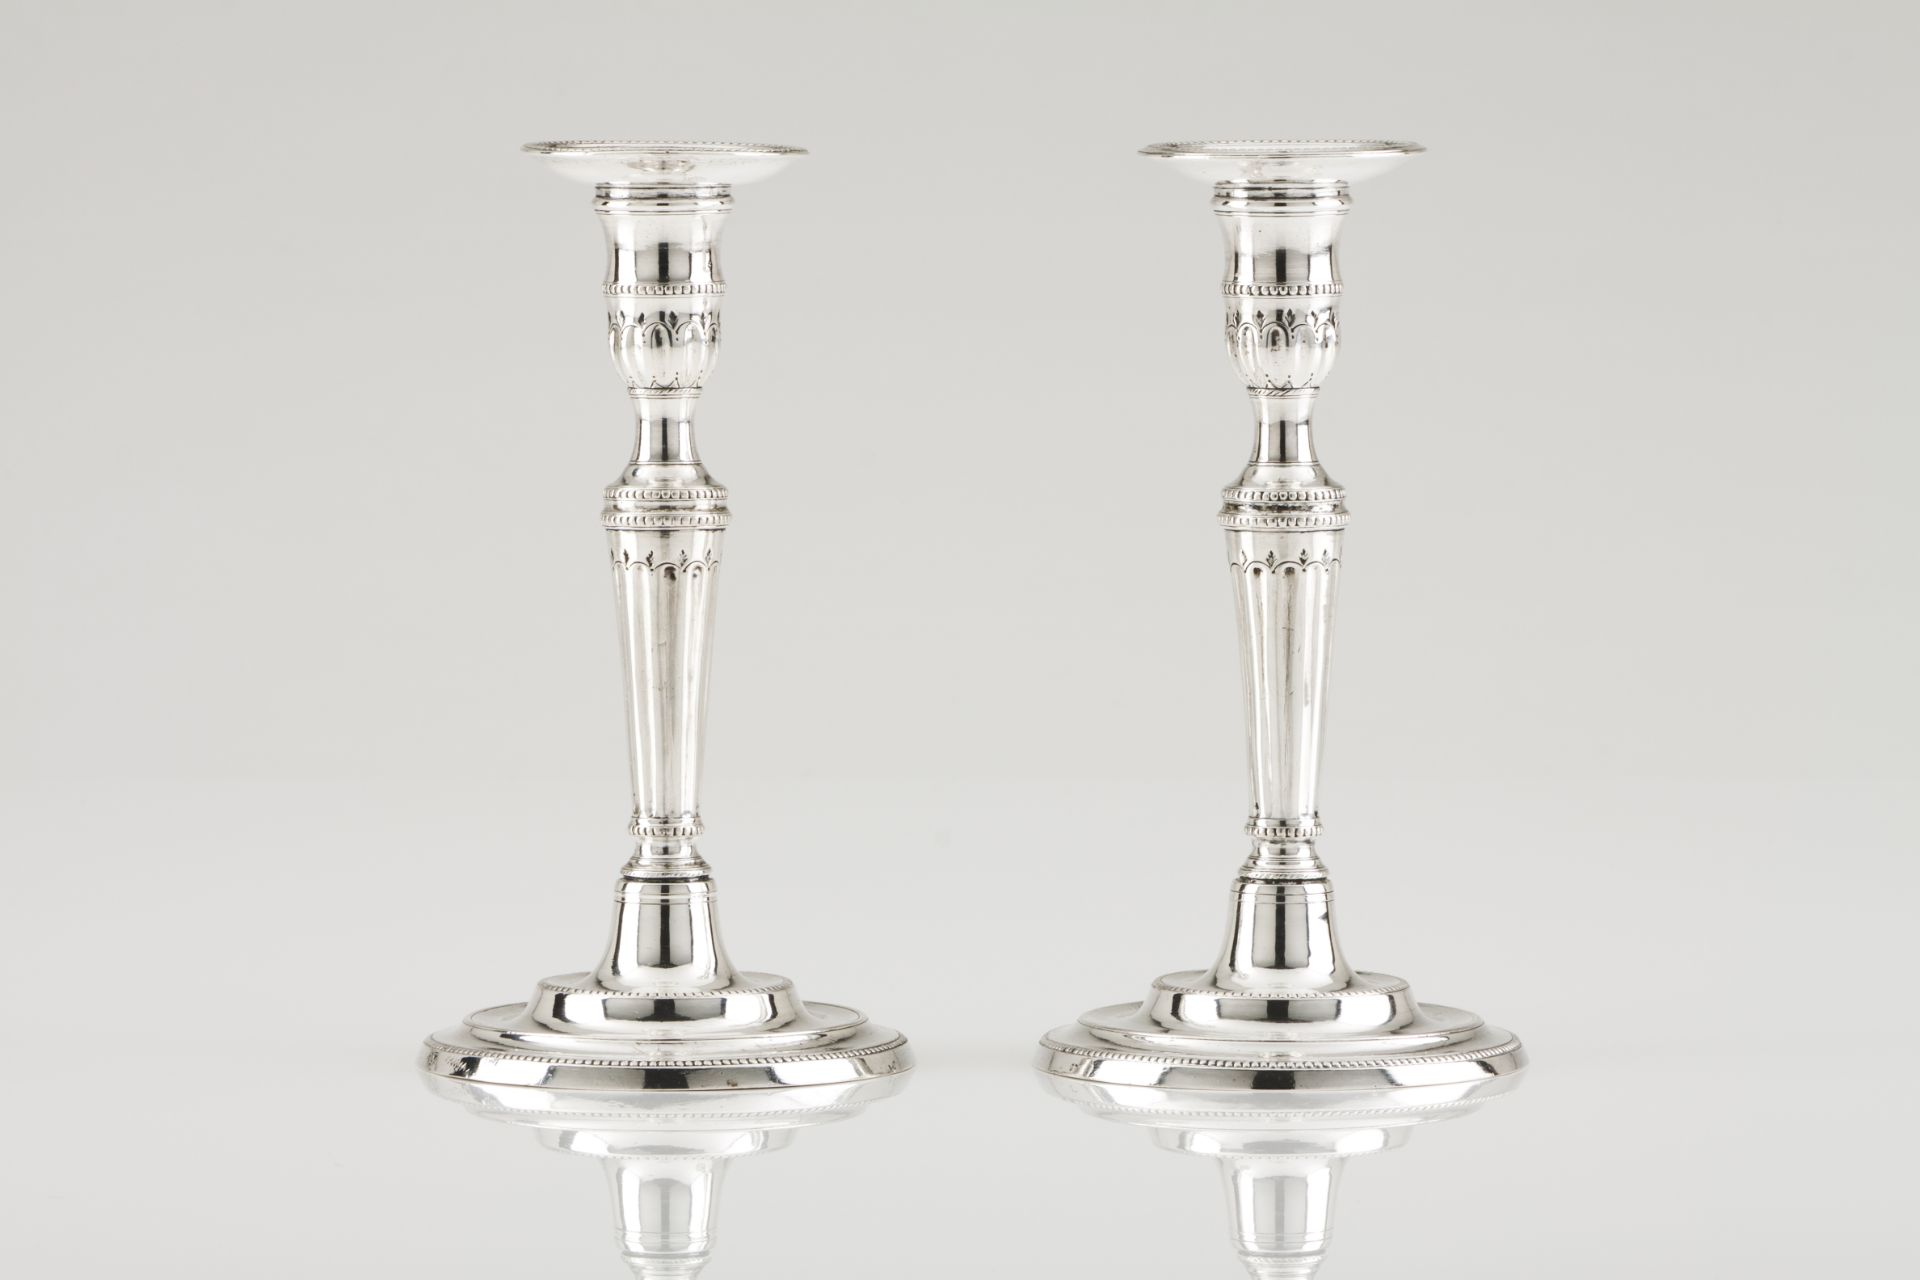 A pair of D. Maria candlesticksPortuguese silver, 18th / 19th centuryFluted shaft engraved with